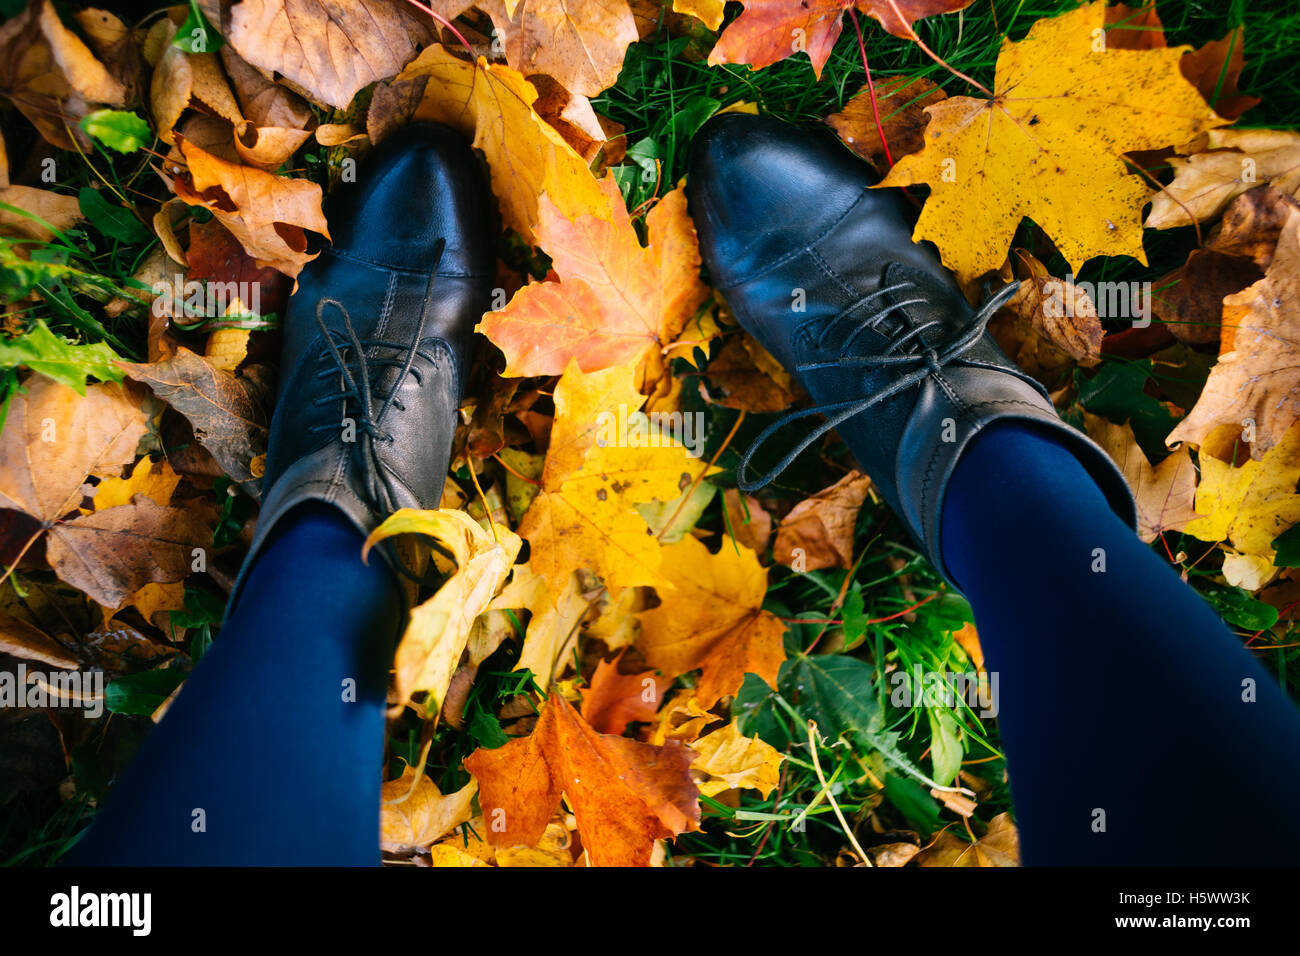 Young woman legs in boots and tights standing in fallen colorful leaves, unusual top view Stock Photo